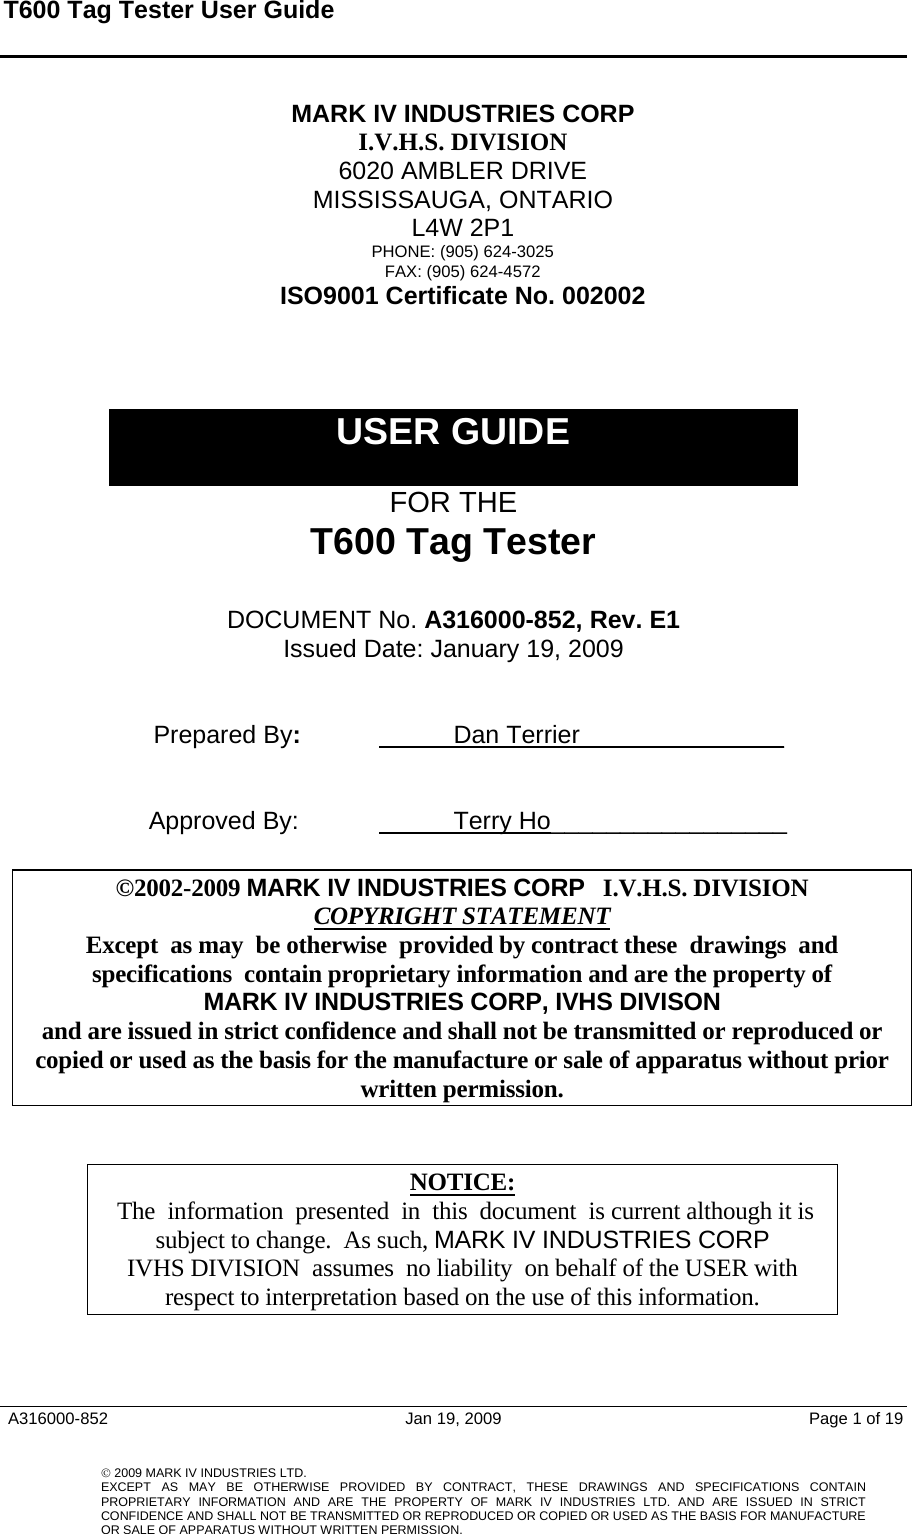 T600 Tag Tester User Guide    MARK IV INDUSTRIES CORP I.V.H.S. DIVISION 6020 AMBLER DRIVE MISSISSAUGA, ONTARIO L4W 2P1 PHONE: (905) 624-3025 FAX: (905) 624-4572 ISO9001 Certificate No. 002002    USER GUIDE  FOR THE T600 Tag Tester  DOCUMENT No. A316000-852, Rev. E1 Issued Date: January 19, 2009     Prepared By:    Dan Terrier  _____________        Approved By:    Terry Ho_________________                                             ©2002-2009 MARK IV INDUSTRIES CORP   I.V.H.S. DIVISION COPYRIGHT STATEMENTExcept  as may  be otherwise  provided by contract these  drawings  and  specifications  contain proprietary information and are the property of  MARK IV INDUSTRIES CORP, IVHS DIVISON  and are issued in strict confidence and shall not be transmitted or reproduced or copied or used as the basis for the manufacture or sale of apparatus without prior written permission.   NOTICE: The  information  presented  in  this  document  is current although it is subject to change.  As such, MARK IV INDUSTRIES CORP IVHS DIVISION  assumes  no liability  on behalf of the USER with respect to interpretation based on the use of this information.    A316000-852  Jan 19, 2009  Page 1 of 19     © 2009 MARK IV INDUSTRIES LTD. EXCEPT AS MAY BE OTHERWISE PROVIDED BY CONTRACT, THESE DRAWINGS AND SPECIFICATIONS CONTAINPROPRIETARY INFORMATION AND ARE THE PROPERTY OF MARK IV INDUSTRIES LTD. AND ARE ISSUED IN STRICT CONFIDENCE AND SHALL NOT BE TRANSMITTED OR REPRODUCED OR COPIED OR USED AS THE BASIS FOR MANUFACTUREOR SALE OF APPARATUS WITHOUT WRITTEN PERMISSION.